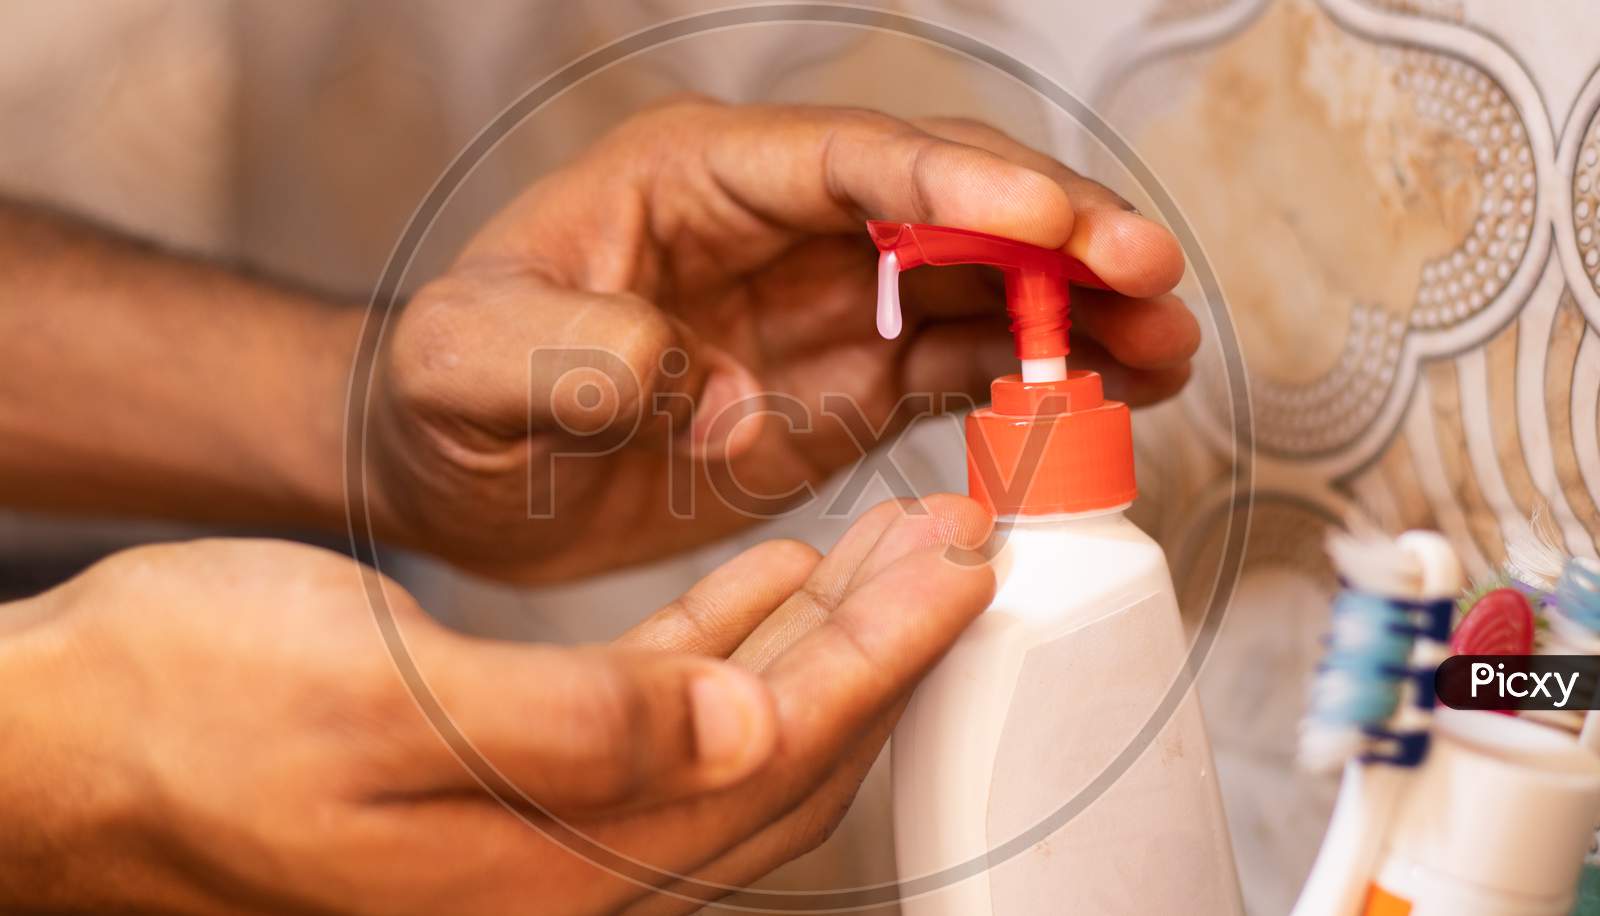 A person using Hand Sanitizer as a safety precaution to protect from Corona Virus or COVID 19